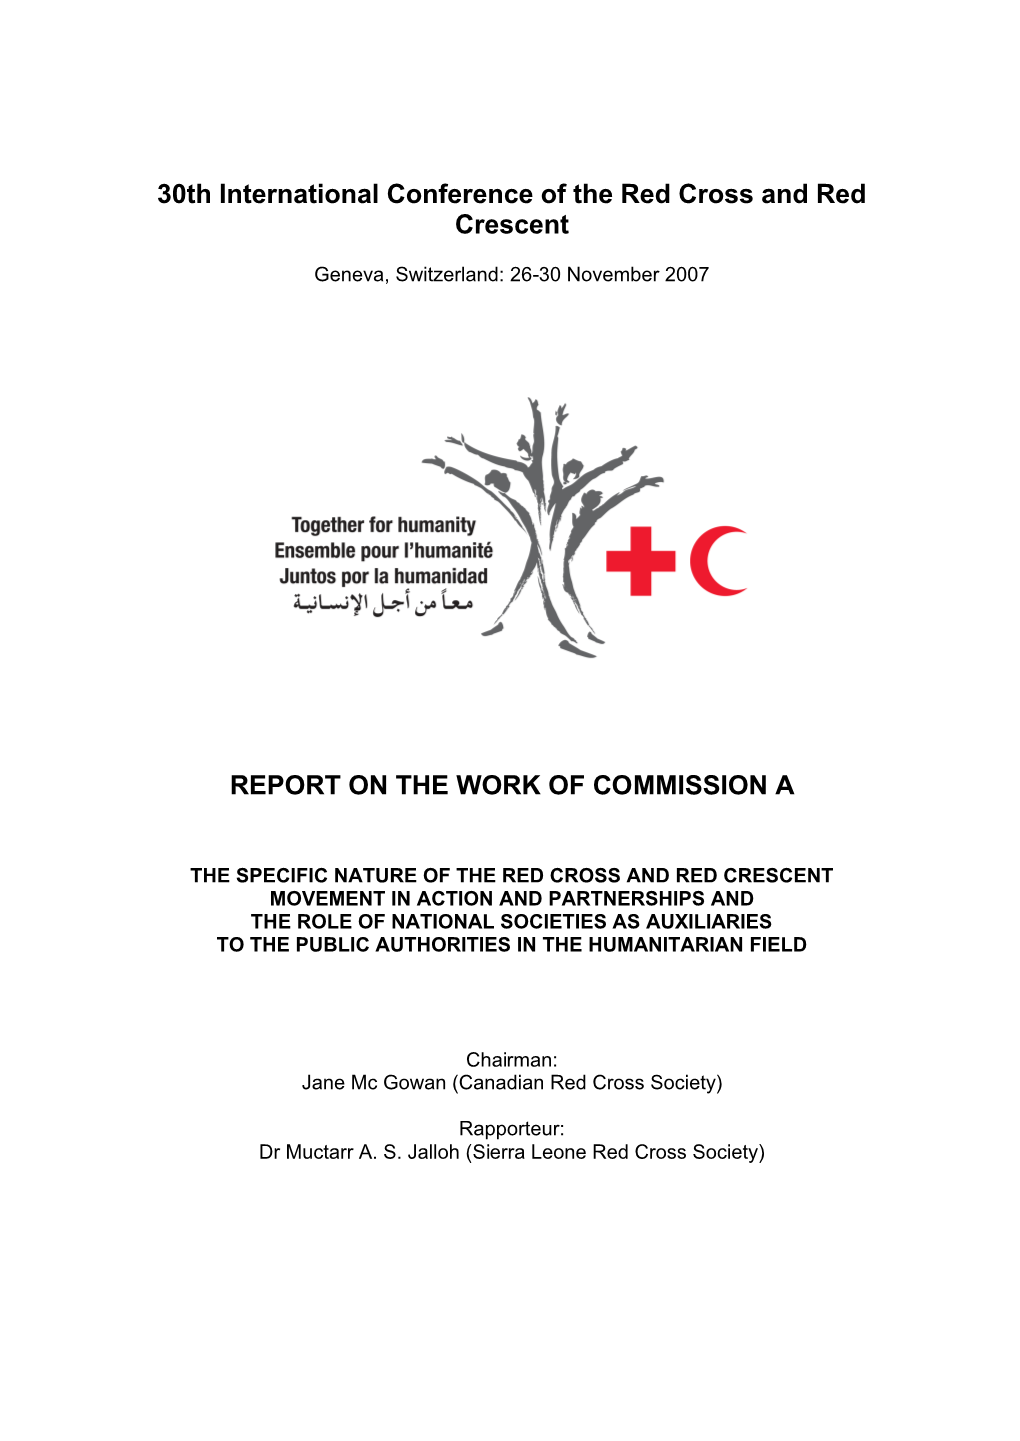 30Th International Conference of the Red Cross and Red Crescent